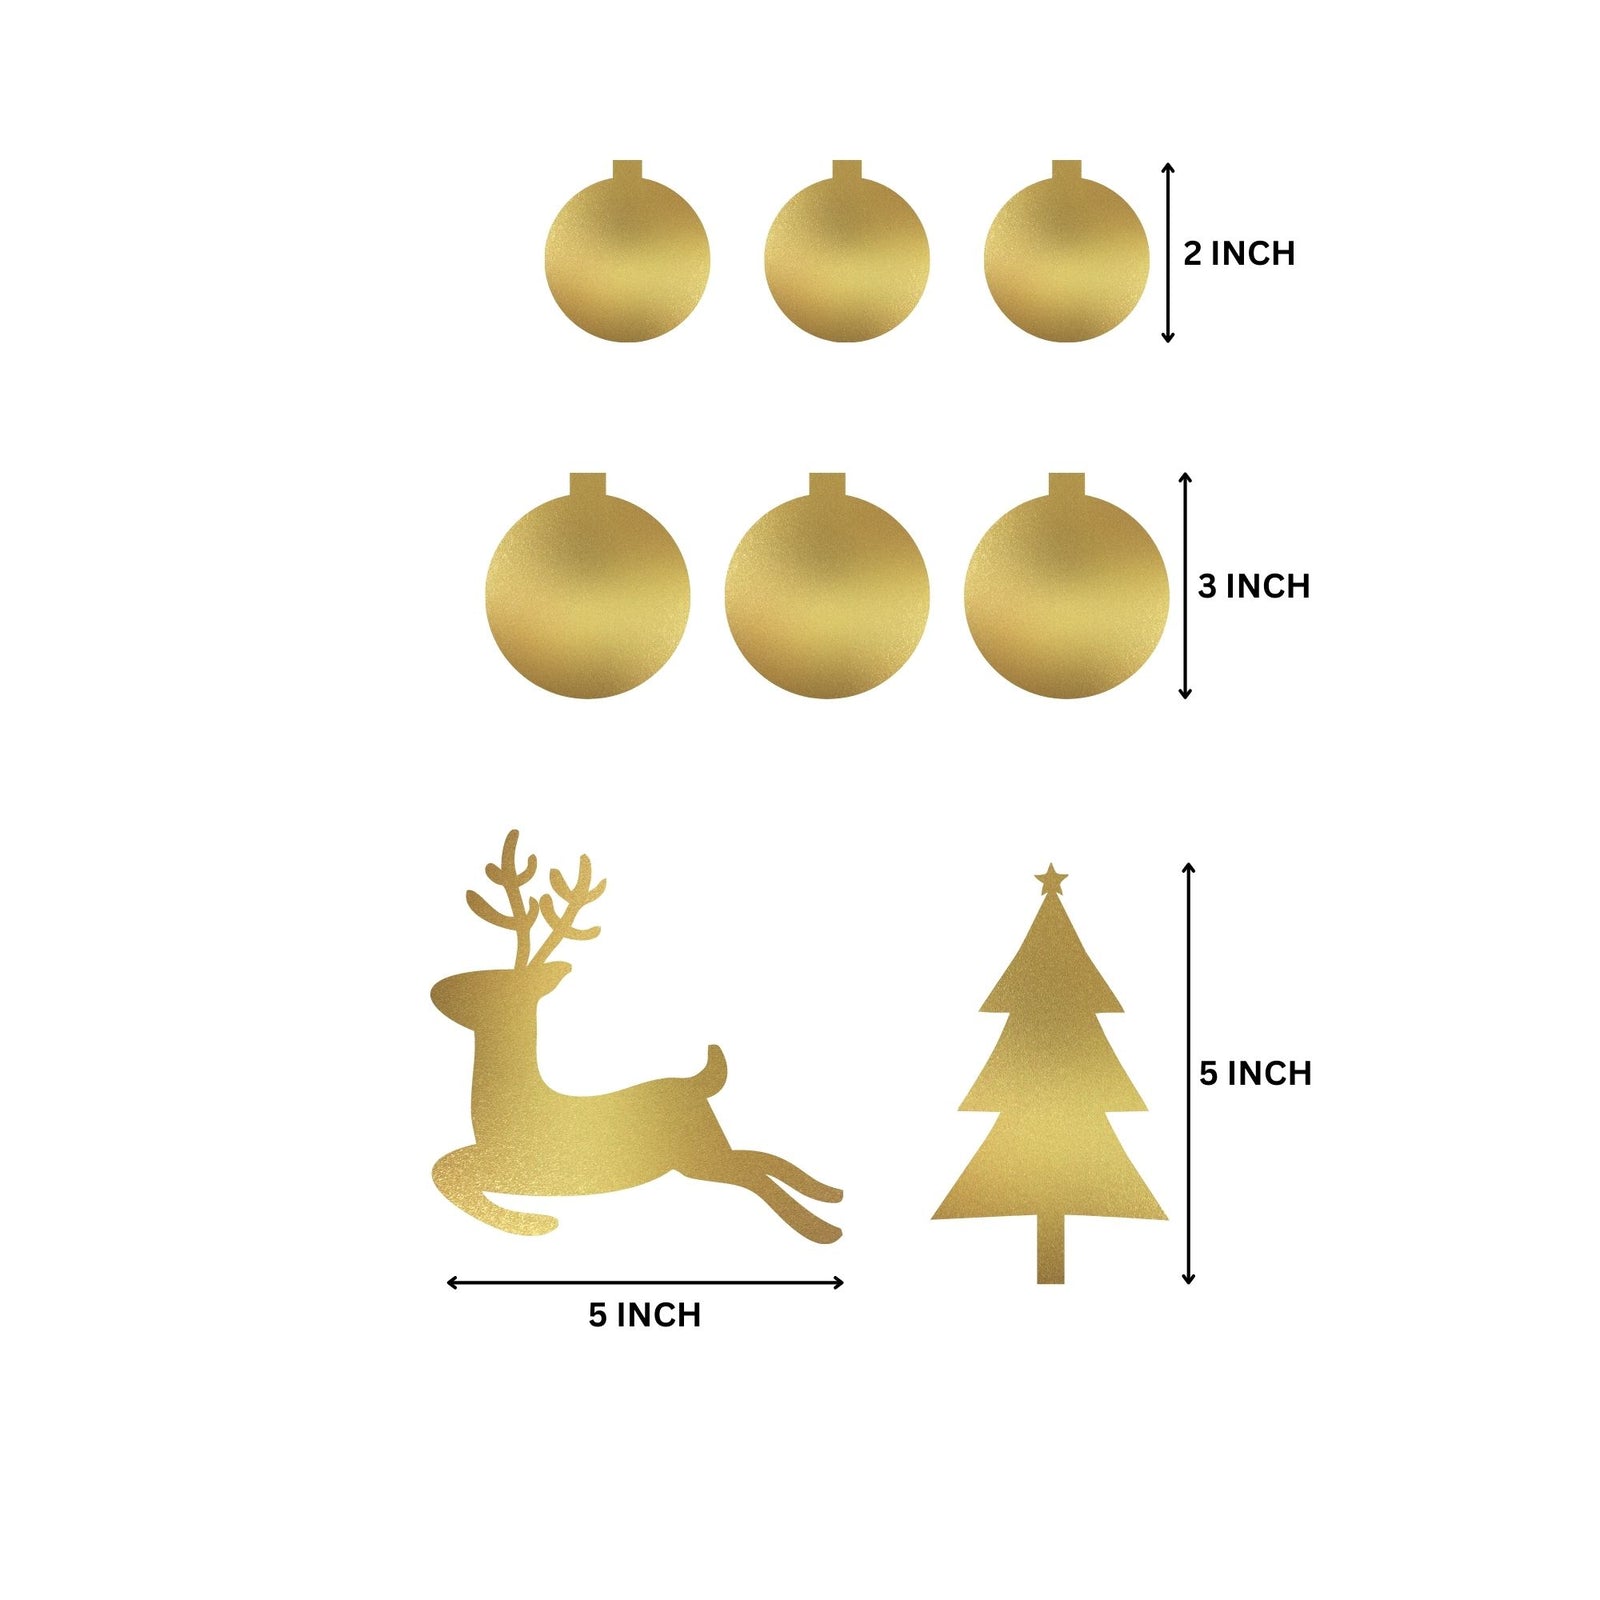 Merry Christmas Decoration Kit (5 Inches / 250 GSM Card Stock / Red, Green, Gold / 51 Pcs)